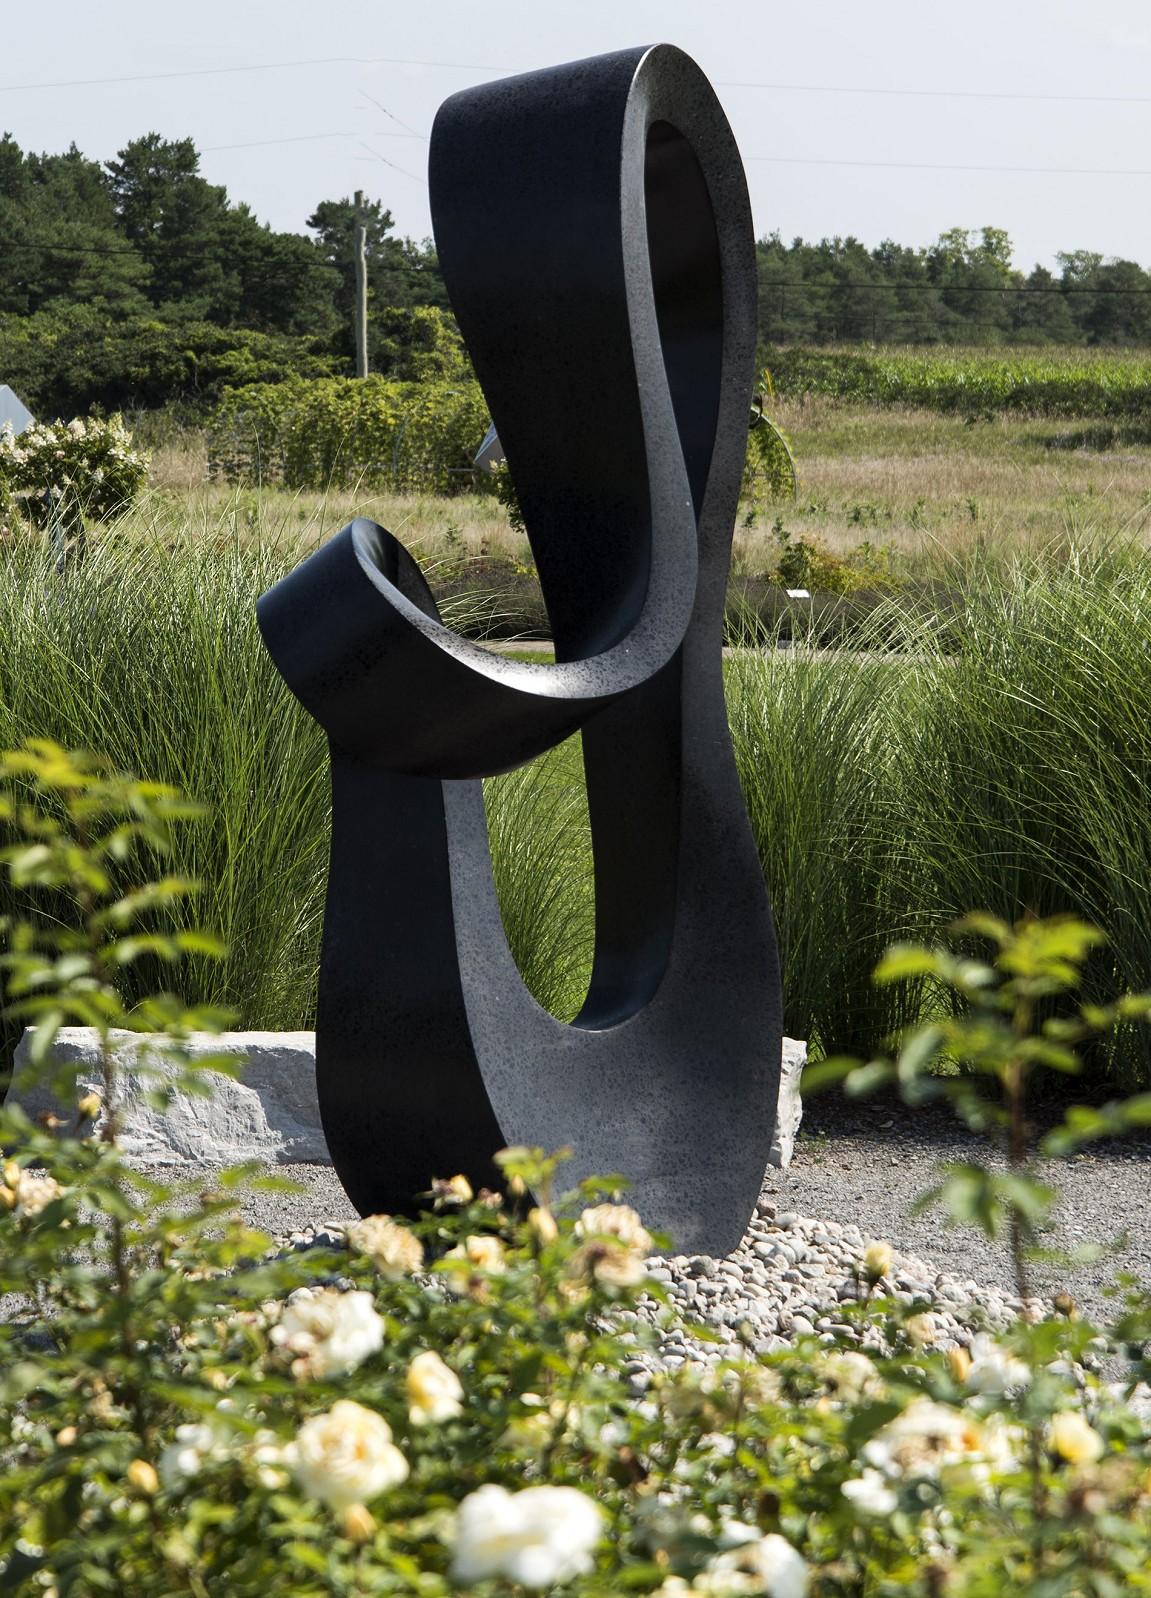 Signature No 4 - large, smooth, black granite, outdoor, abstract, sculpture - Contemporary Sculpture by Jeremy Guy